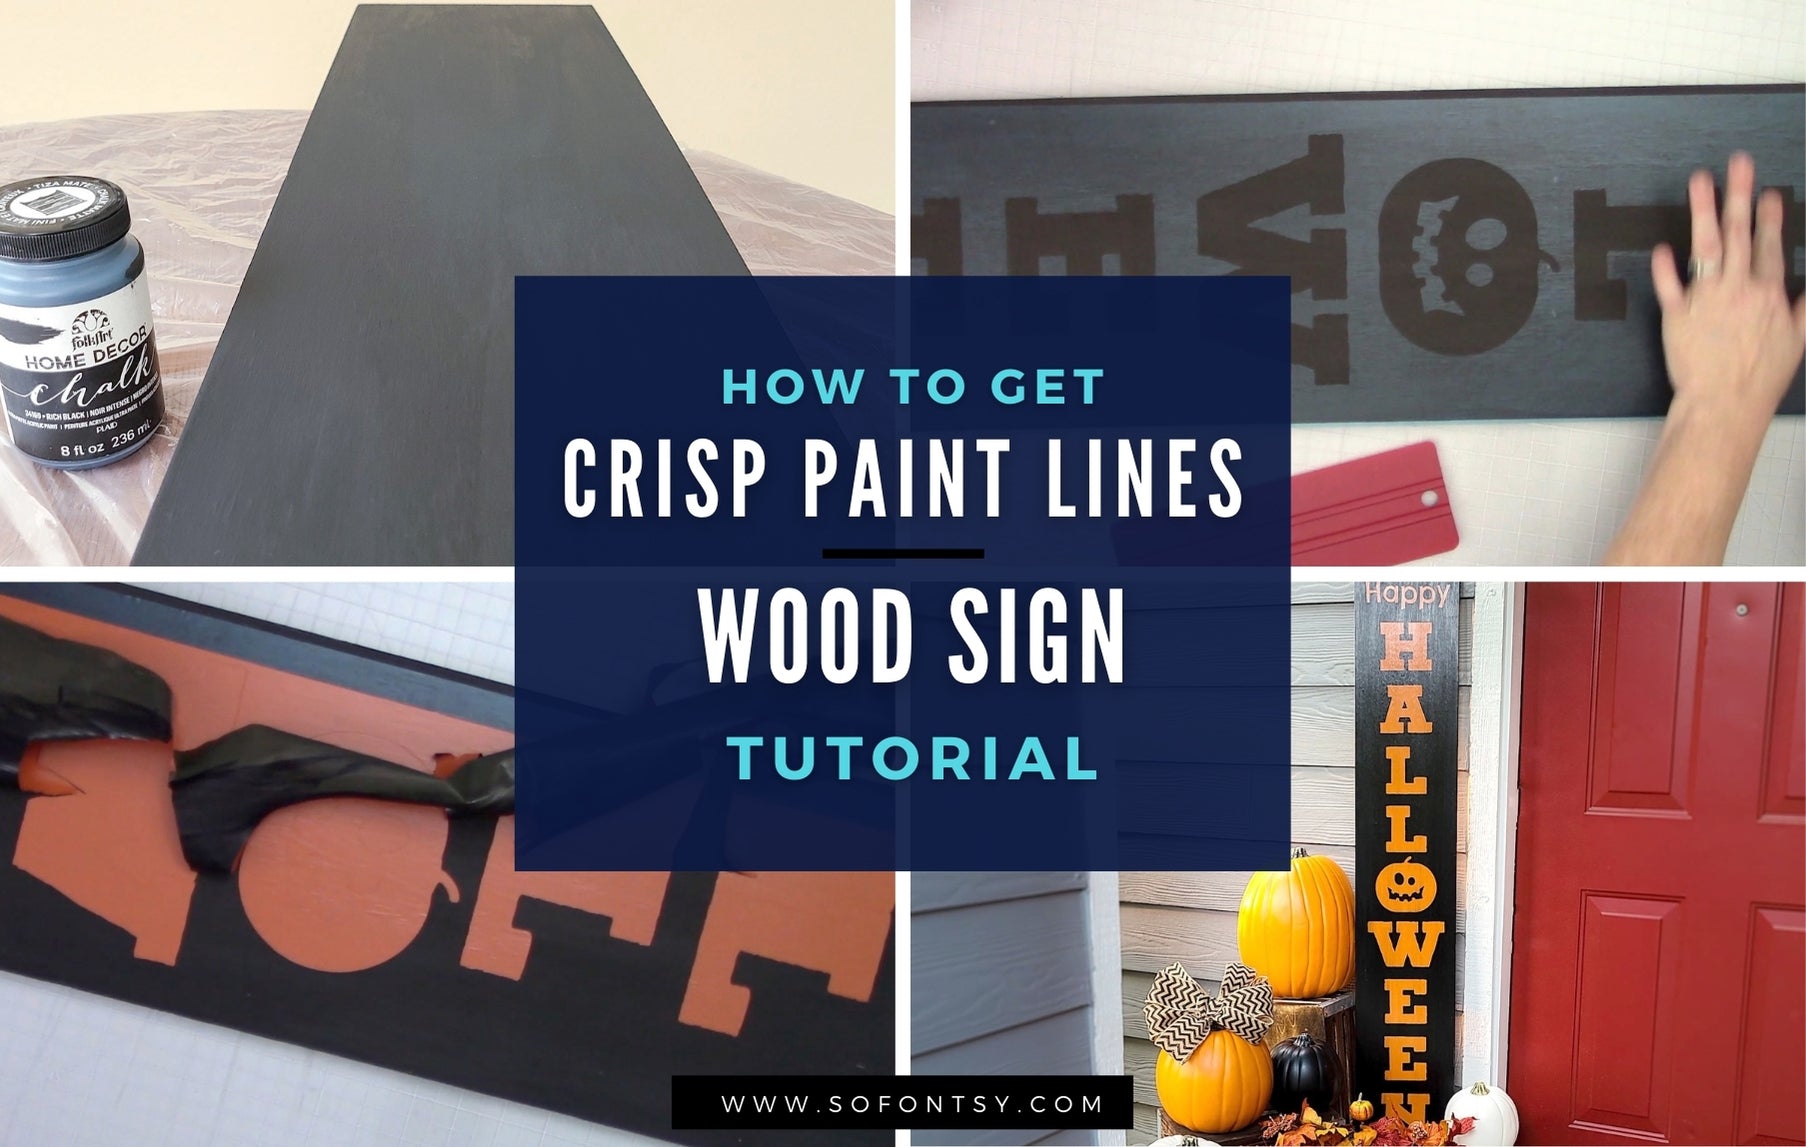 How to Stencil on Wood